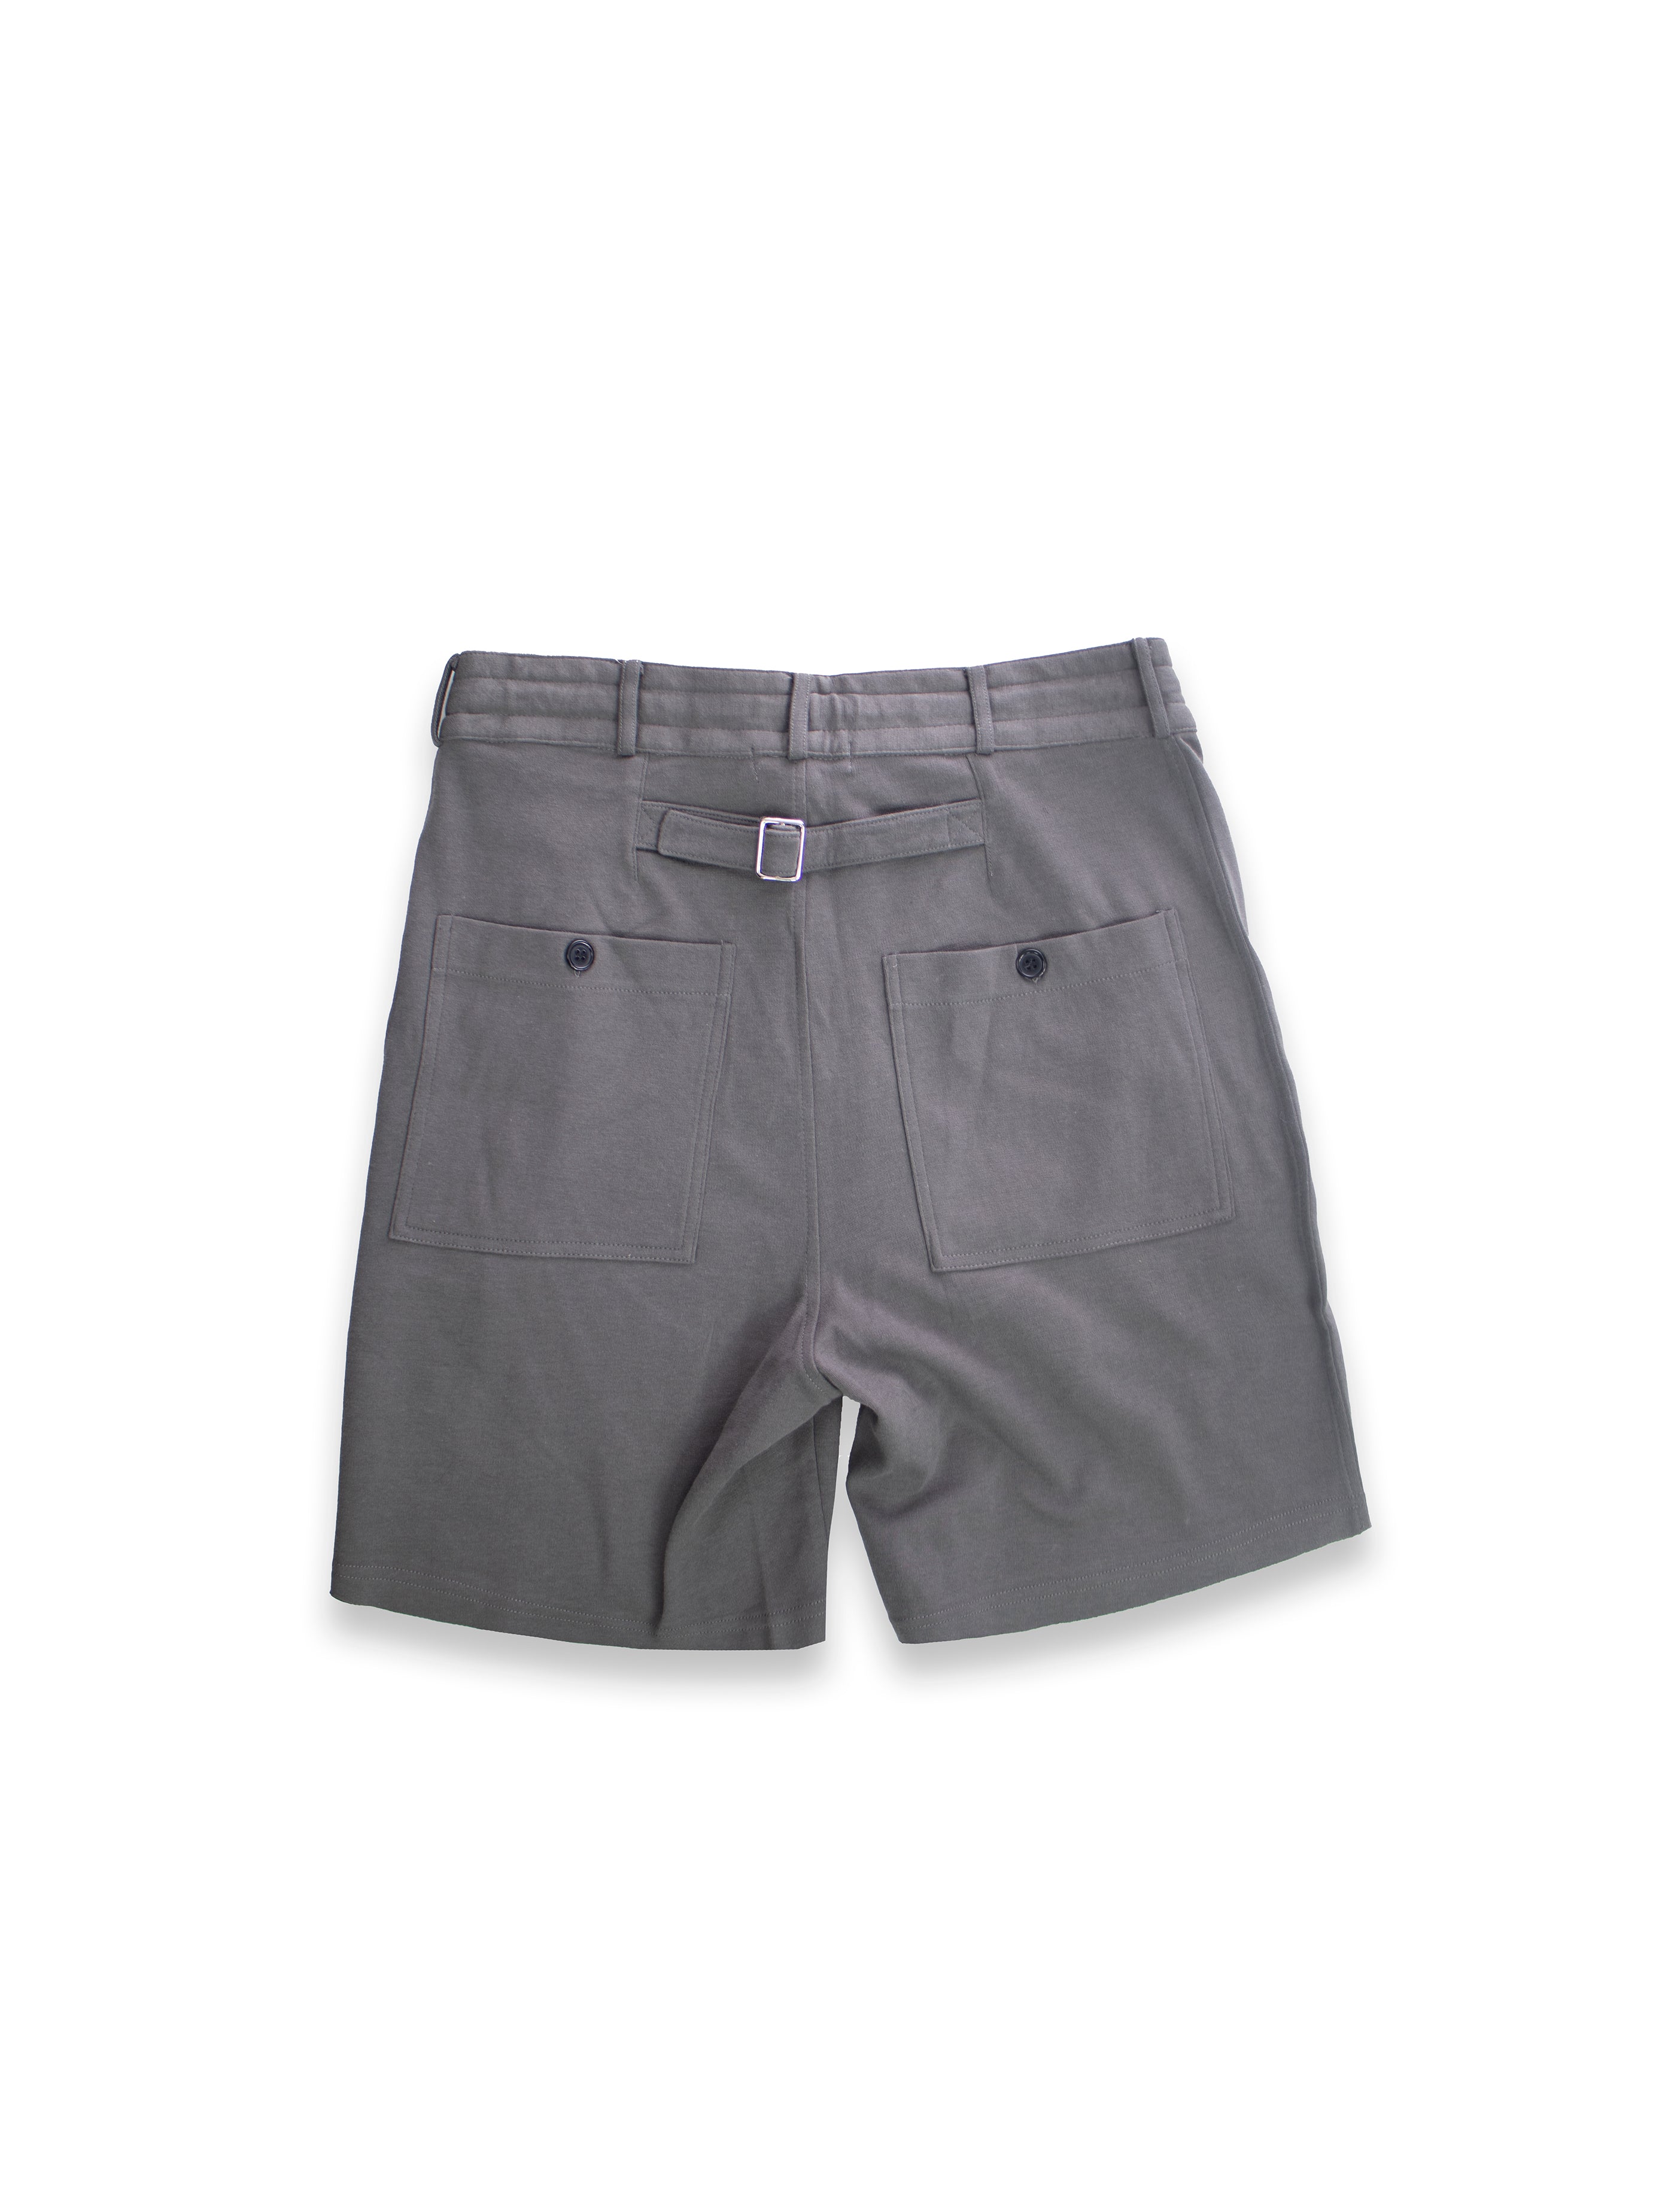 Dark Grey Jogging Shorts with Buckle and Zips